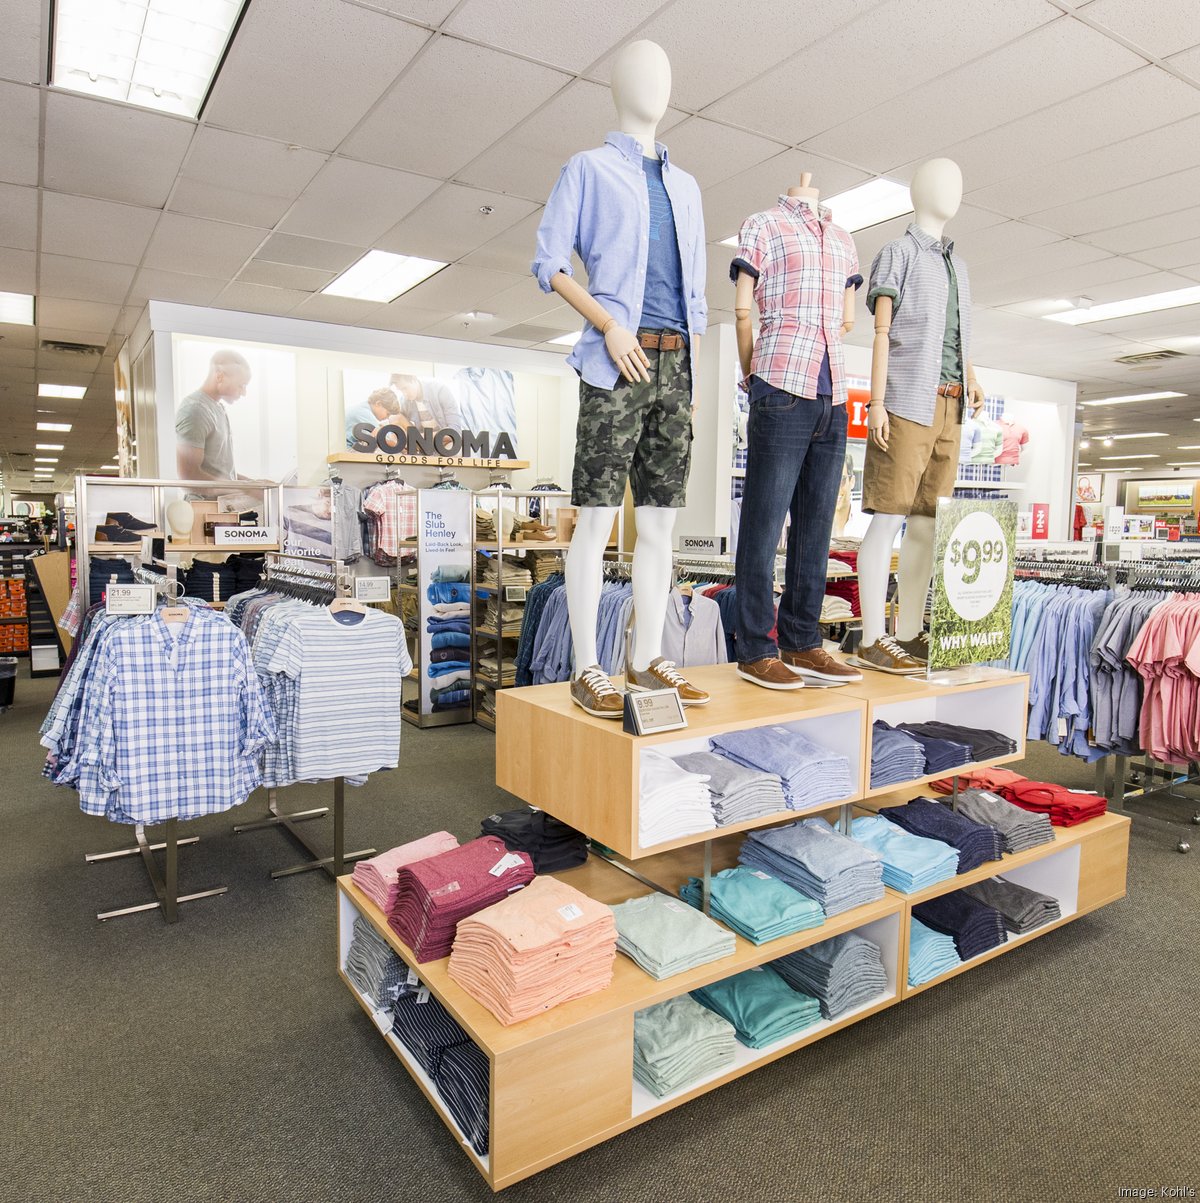 Kohl's is putting a Weight Watchers studio in one of its stores